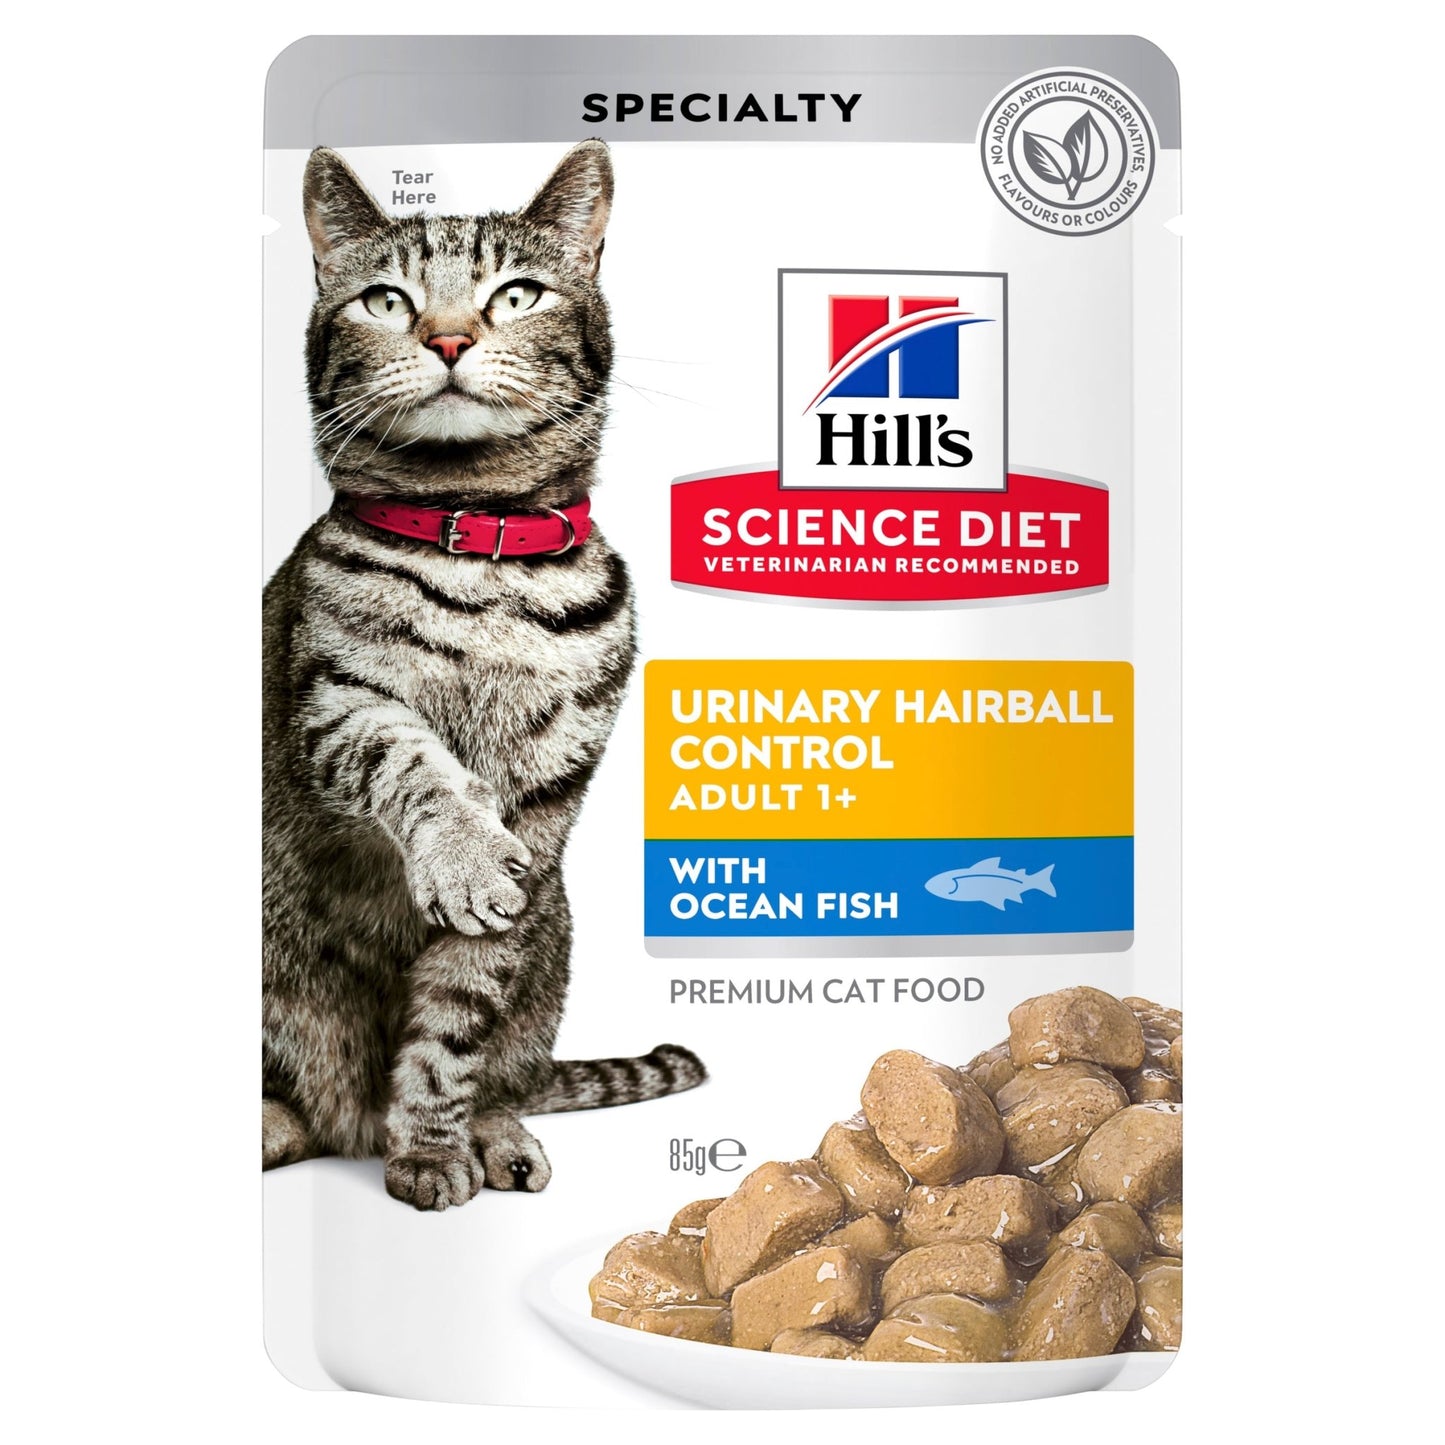 Hill's Science Diet Adult Urinary Hairball Control Ocean Fish Cat Food pouches 85g - Woonona Petfood & Produce